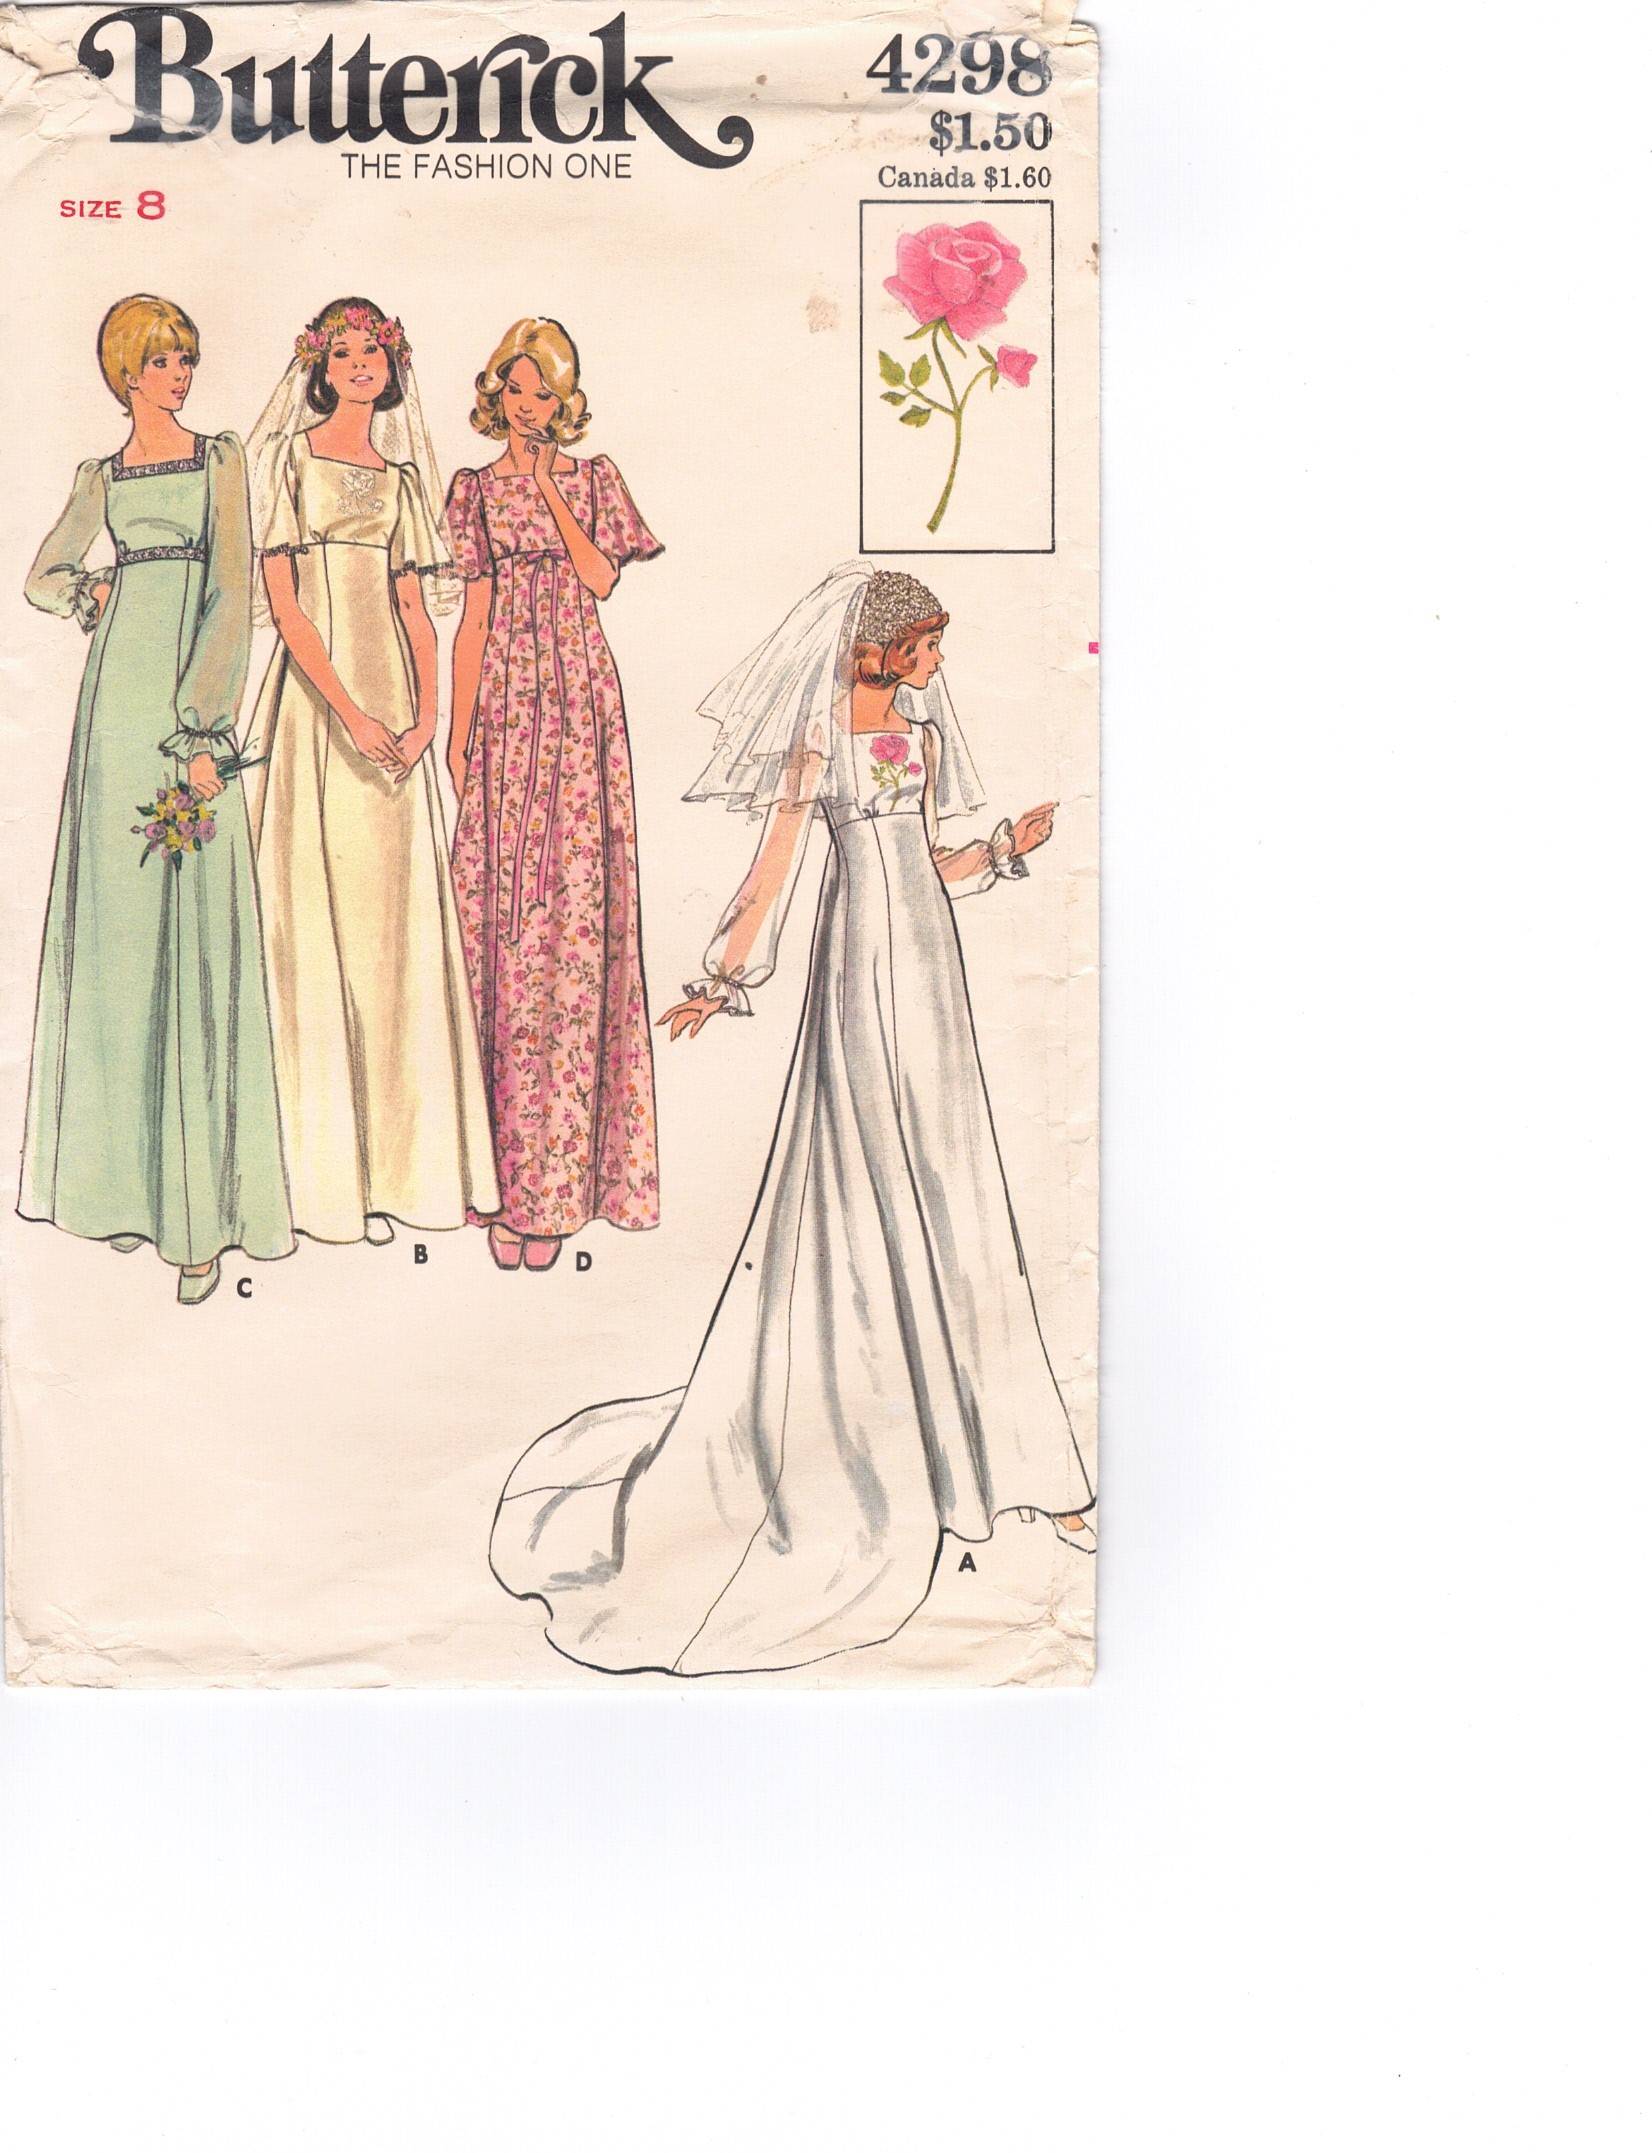 Butterick Pattern 4298 Wedding Gown, Bridesmaid and formal dresses